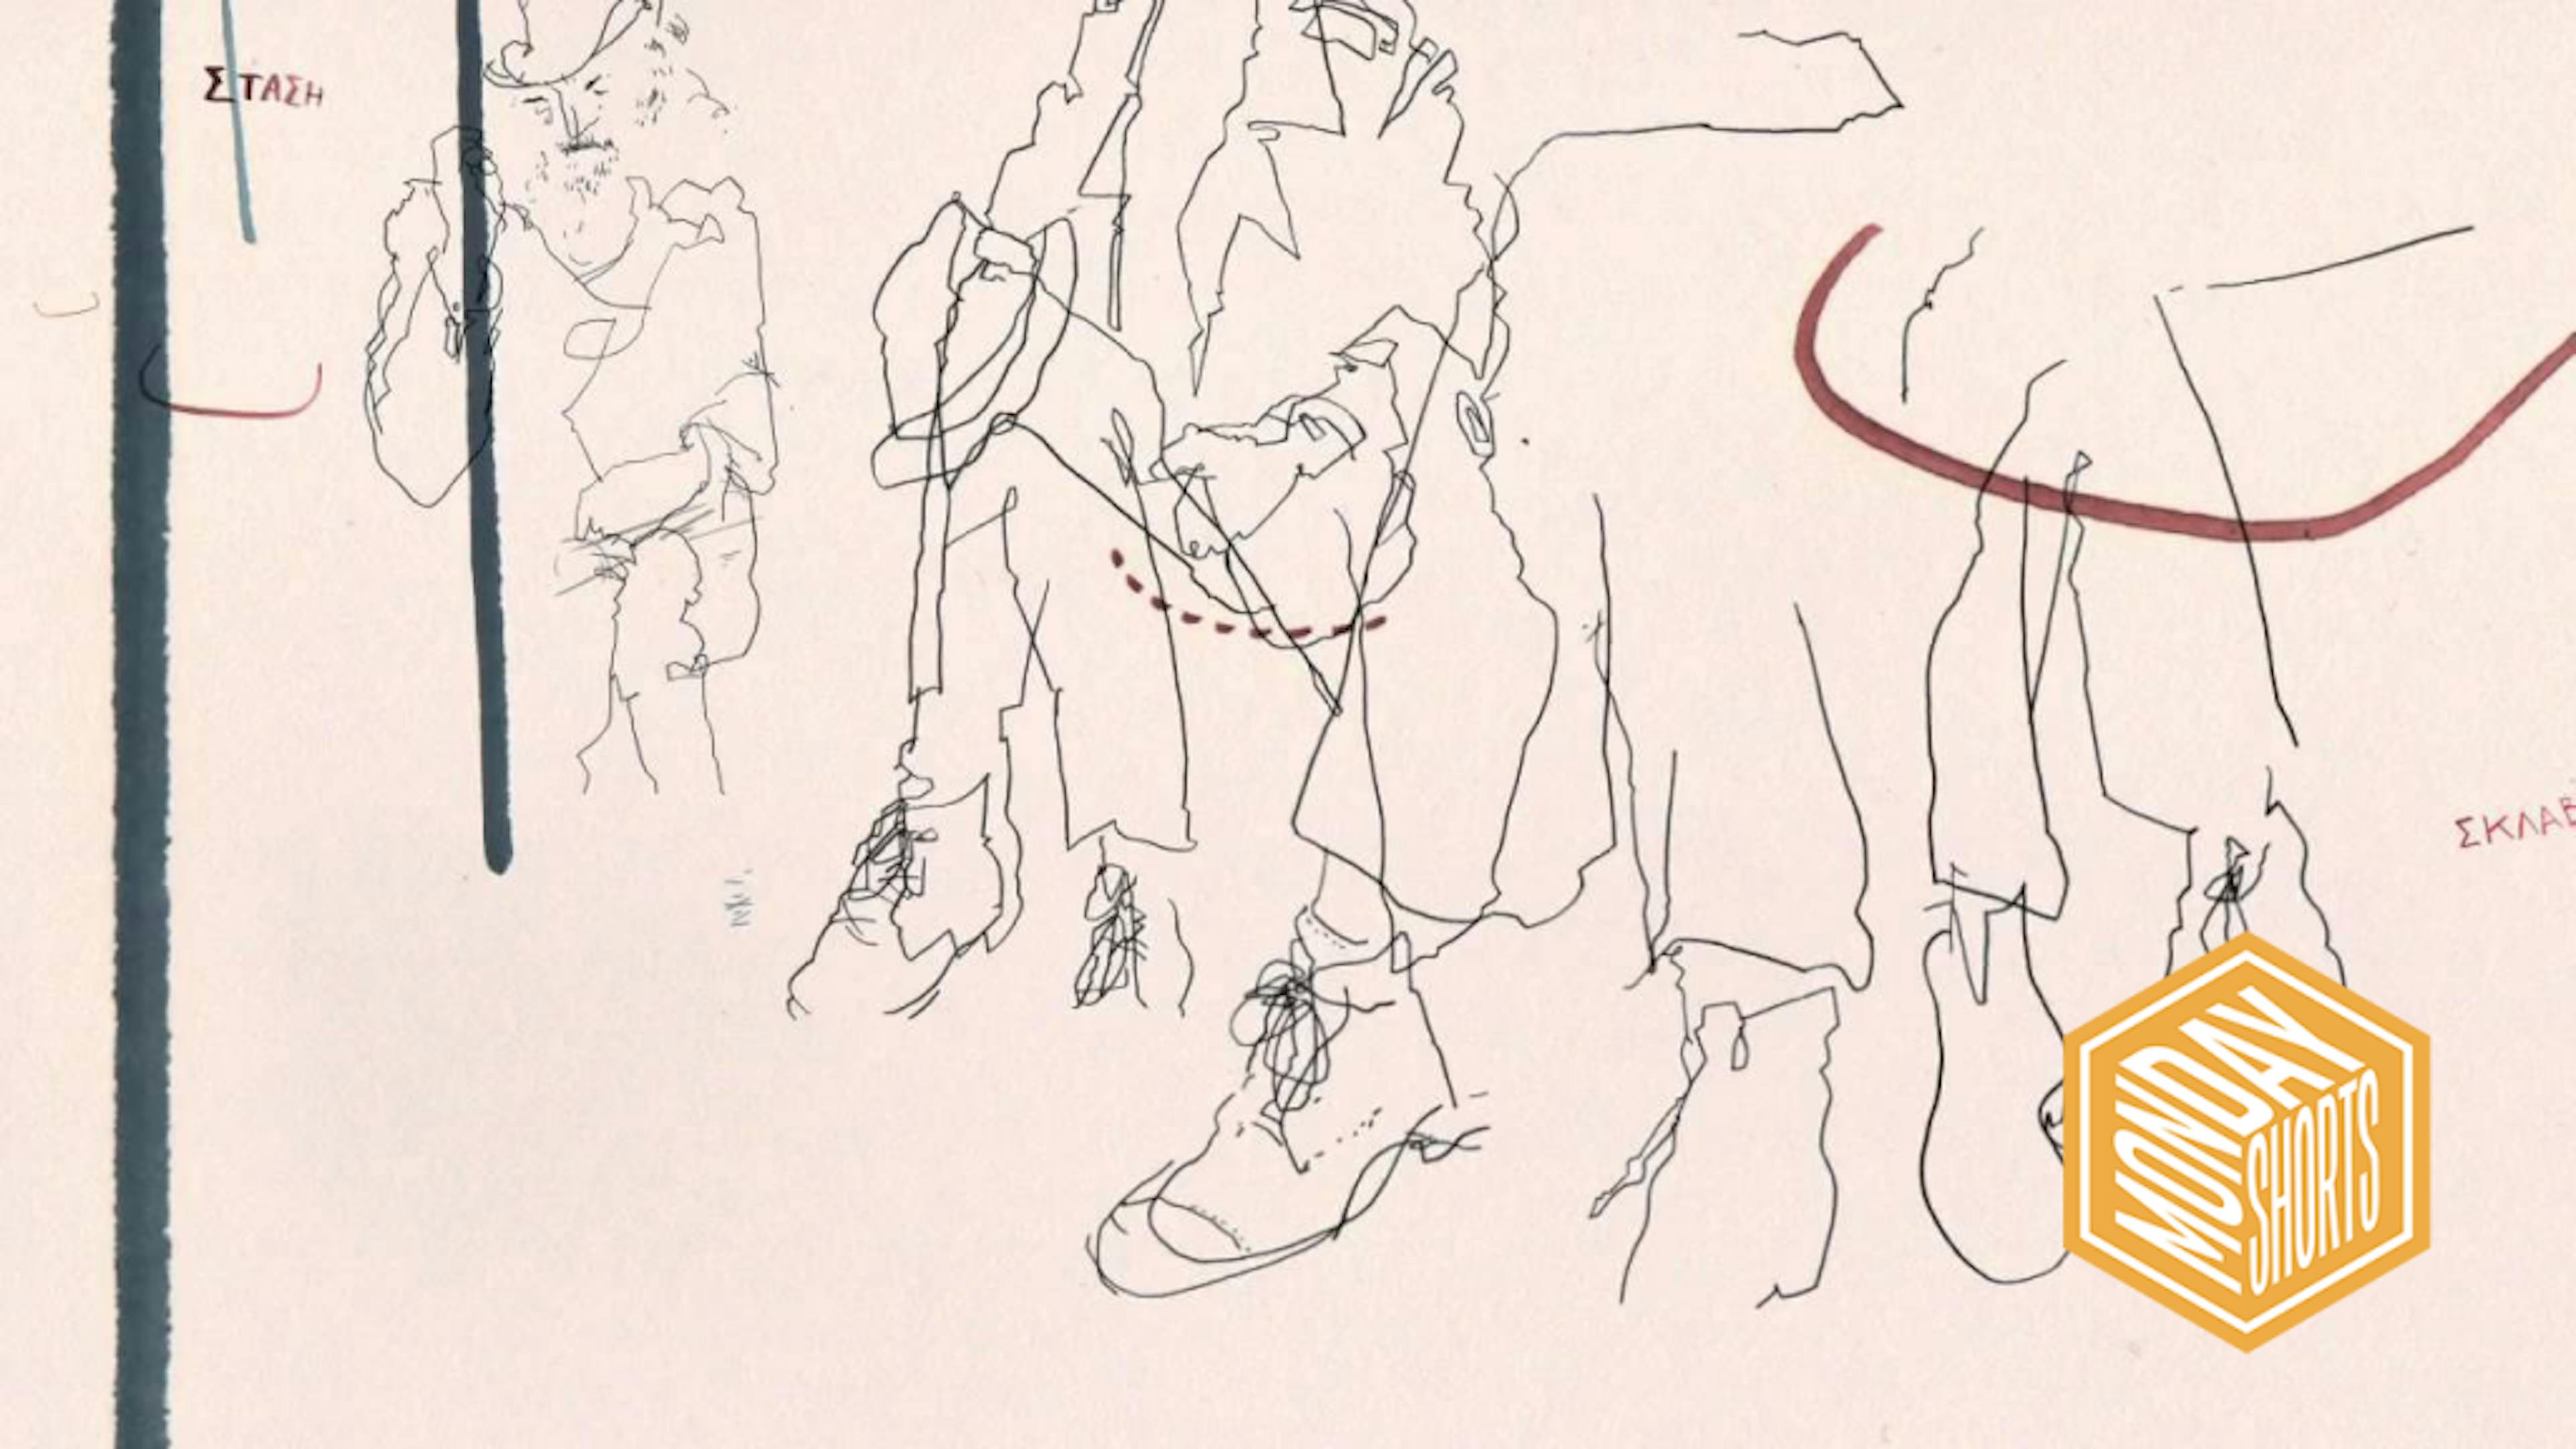 contour line drawing of people sitting next to each other in what looks lik ea train